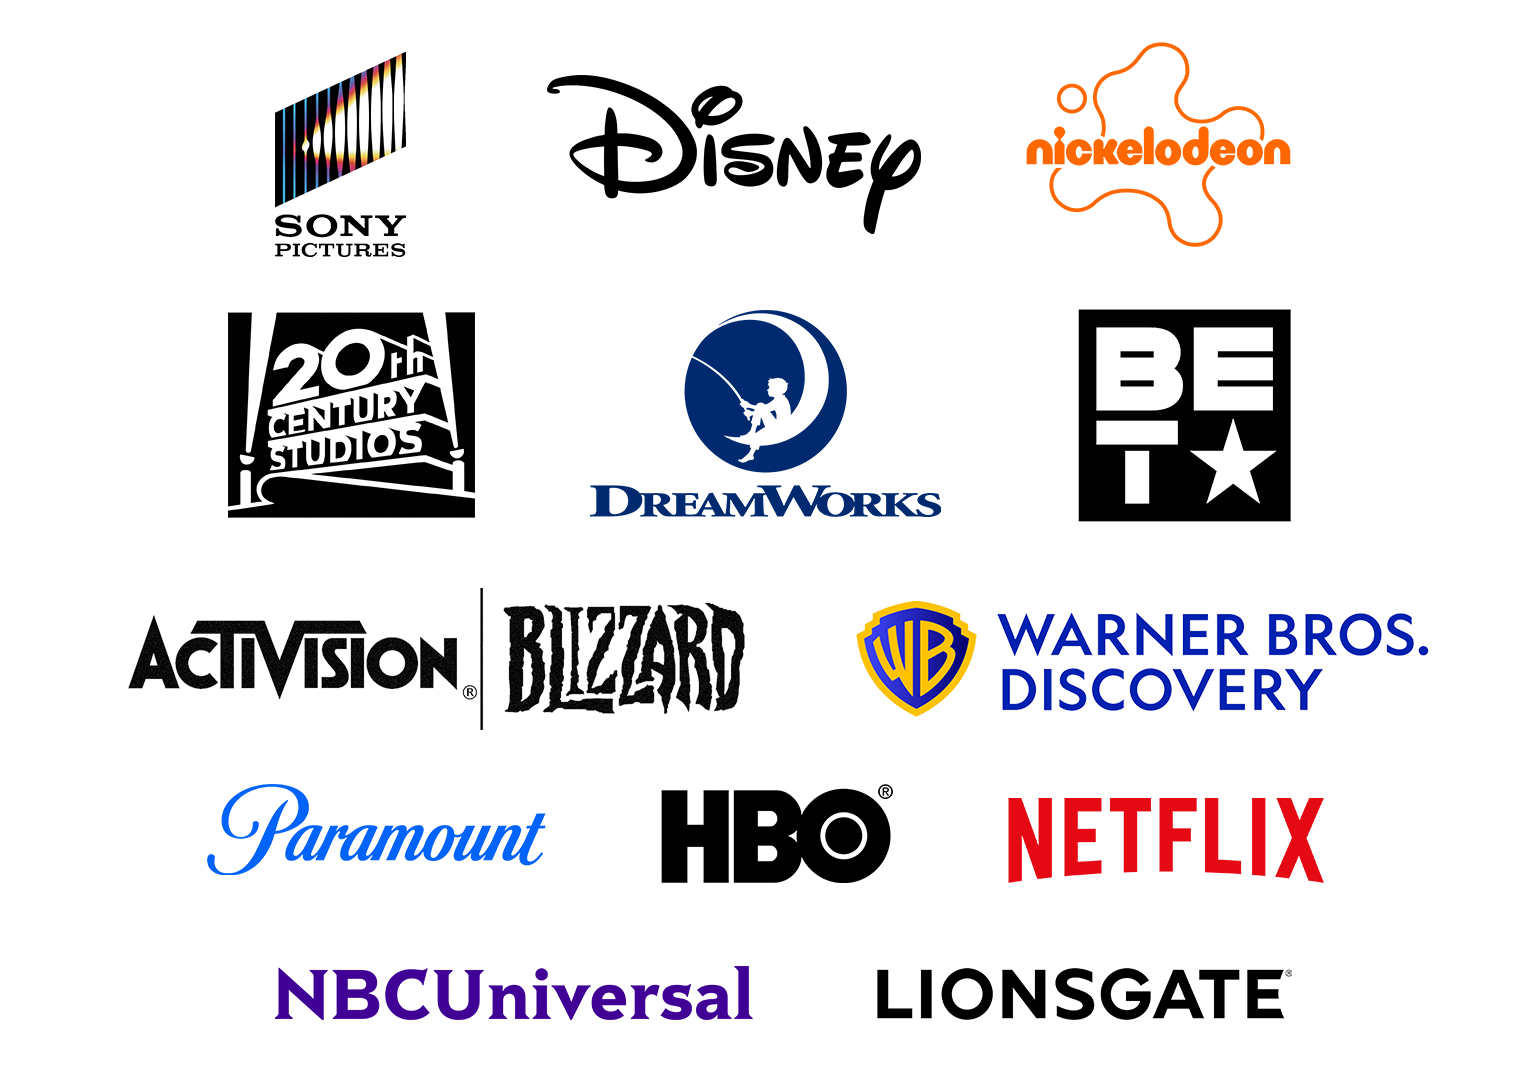 Collage of institutions logos including Sony Pictures, Disney, Nickelodeon, 20th Century Studios, DreamWorks, BET, Activision | Blizzard, Warner Bros. Discovery, Paramount, HBO, Netflix, NBCUniversal and Lionsgate.